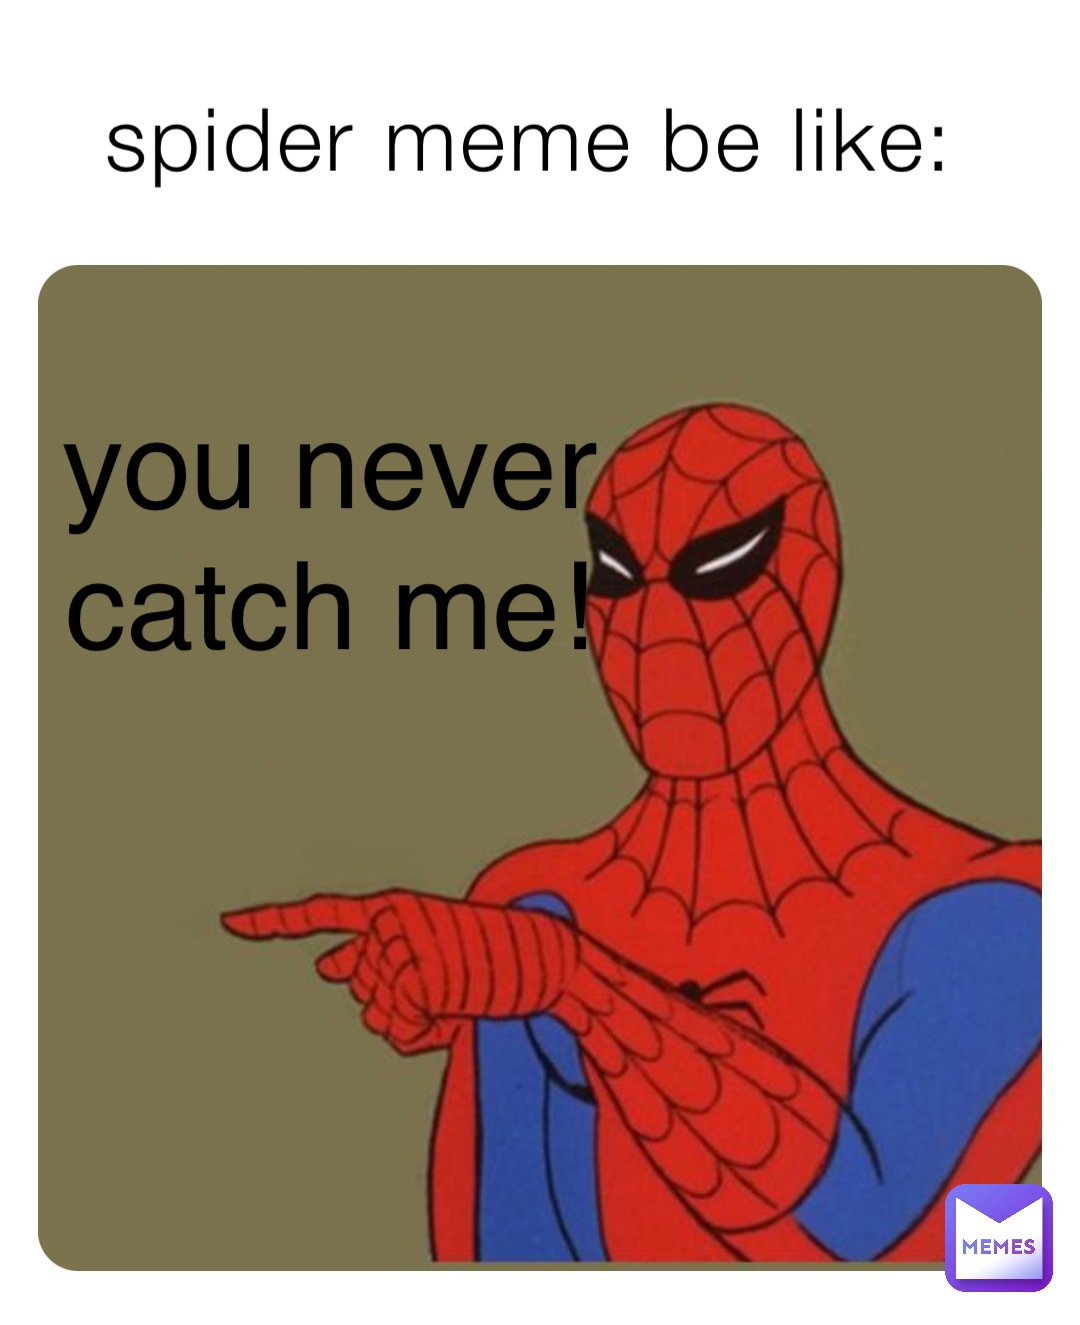 spider meme be like: you never catch me!